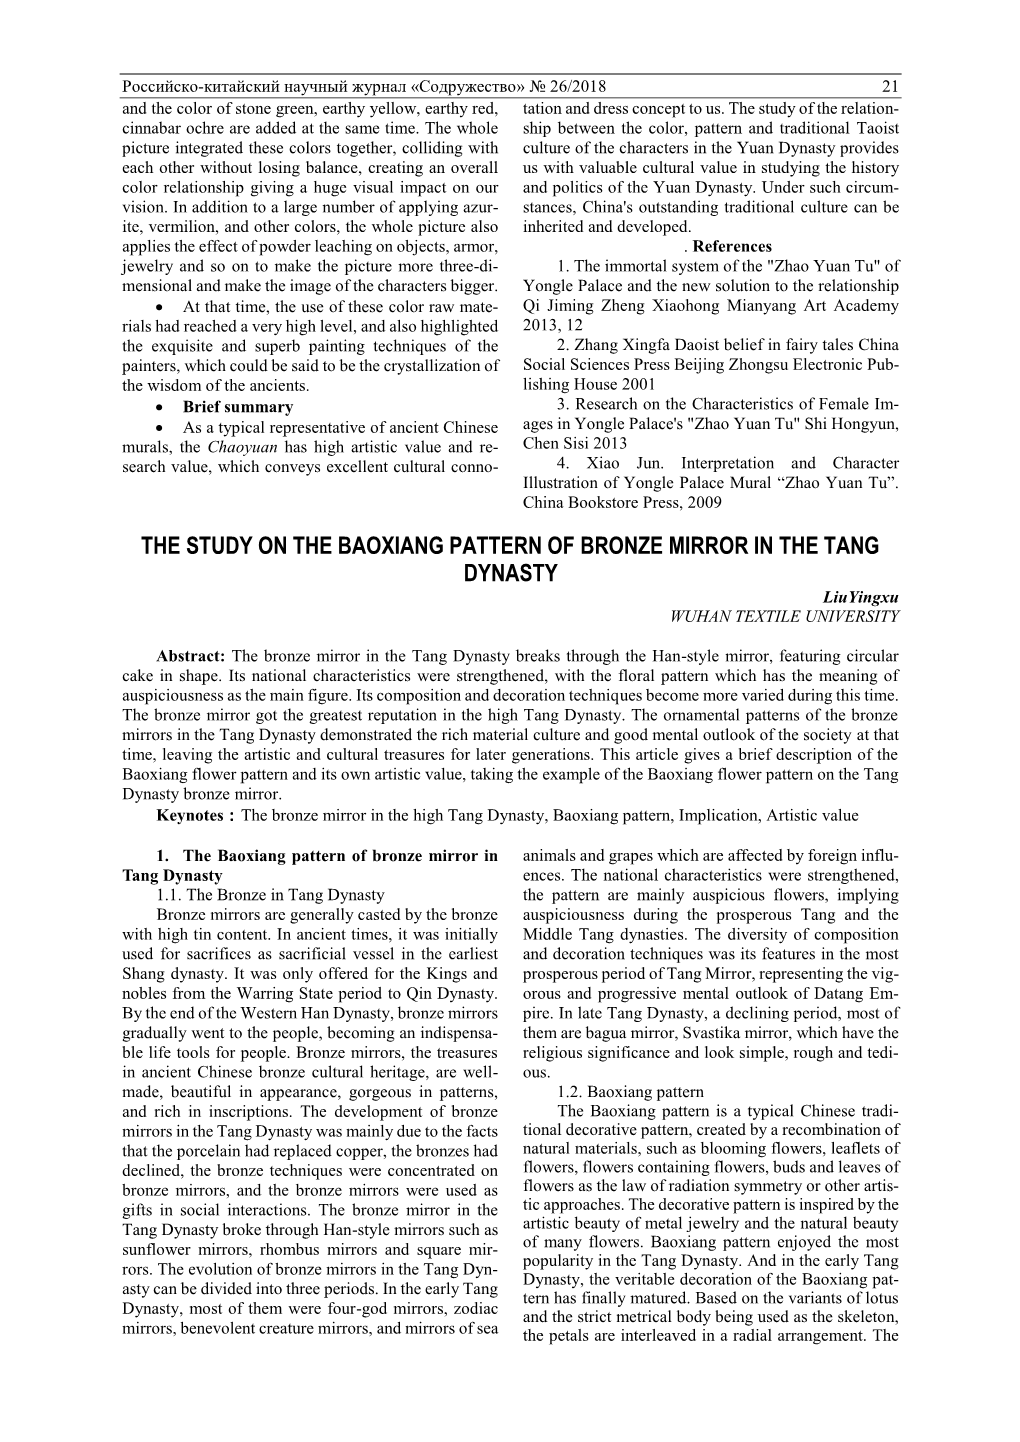 THE STUDY on the BAOXIANG PATTERN of BRONZE MIRROR in the TANG DYNASTY Liuyingxu WUHAN TEXTILE UNIVERSITY